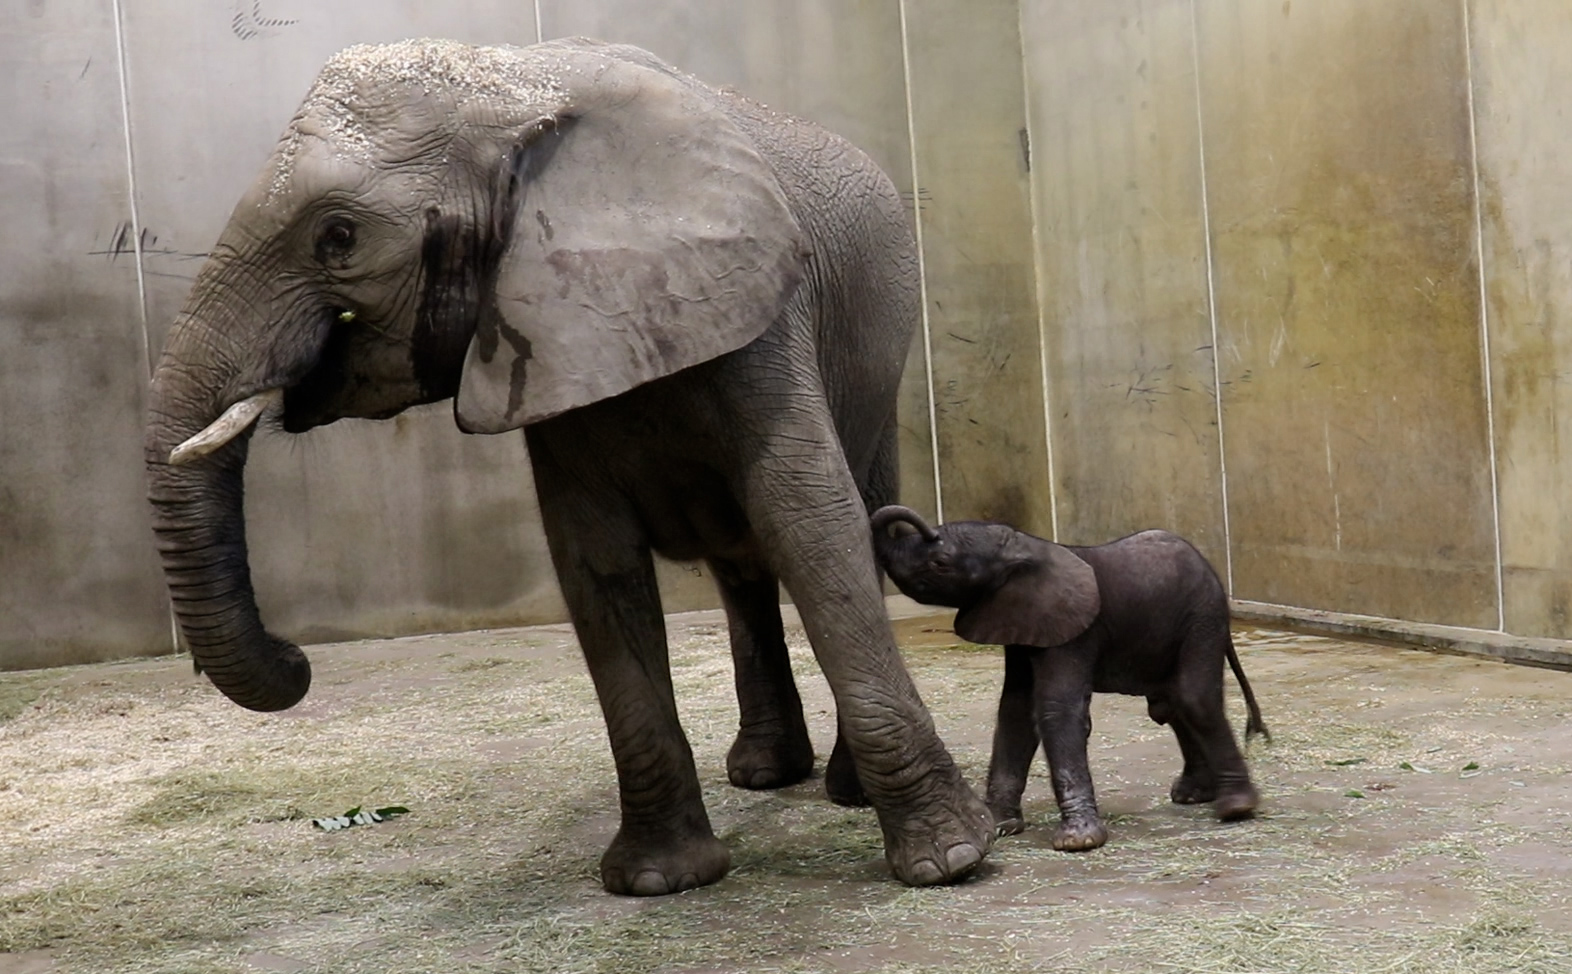 An elephant calf born on Labor Day in Indianapolis touches his mother with his trunk.